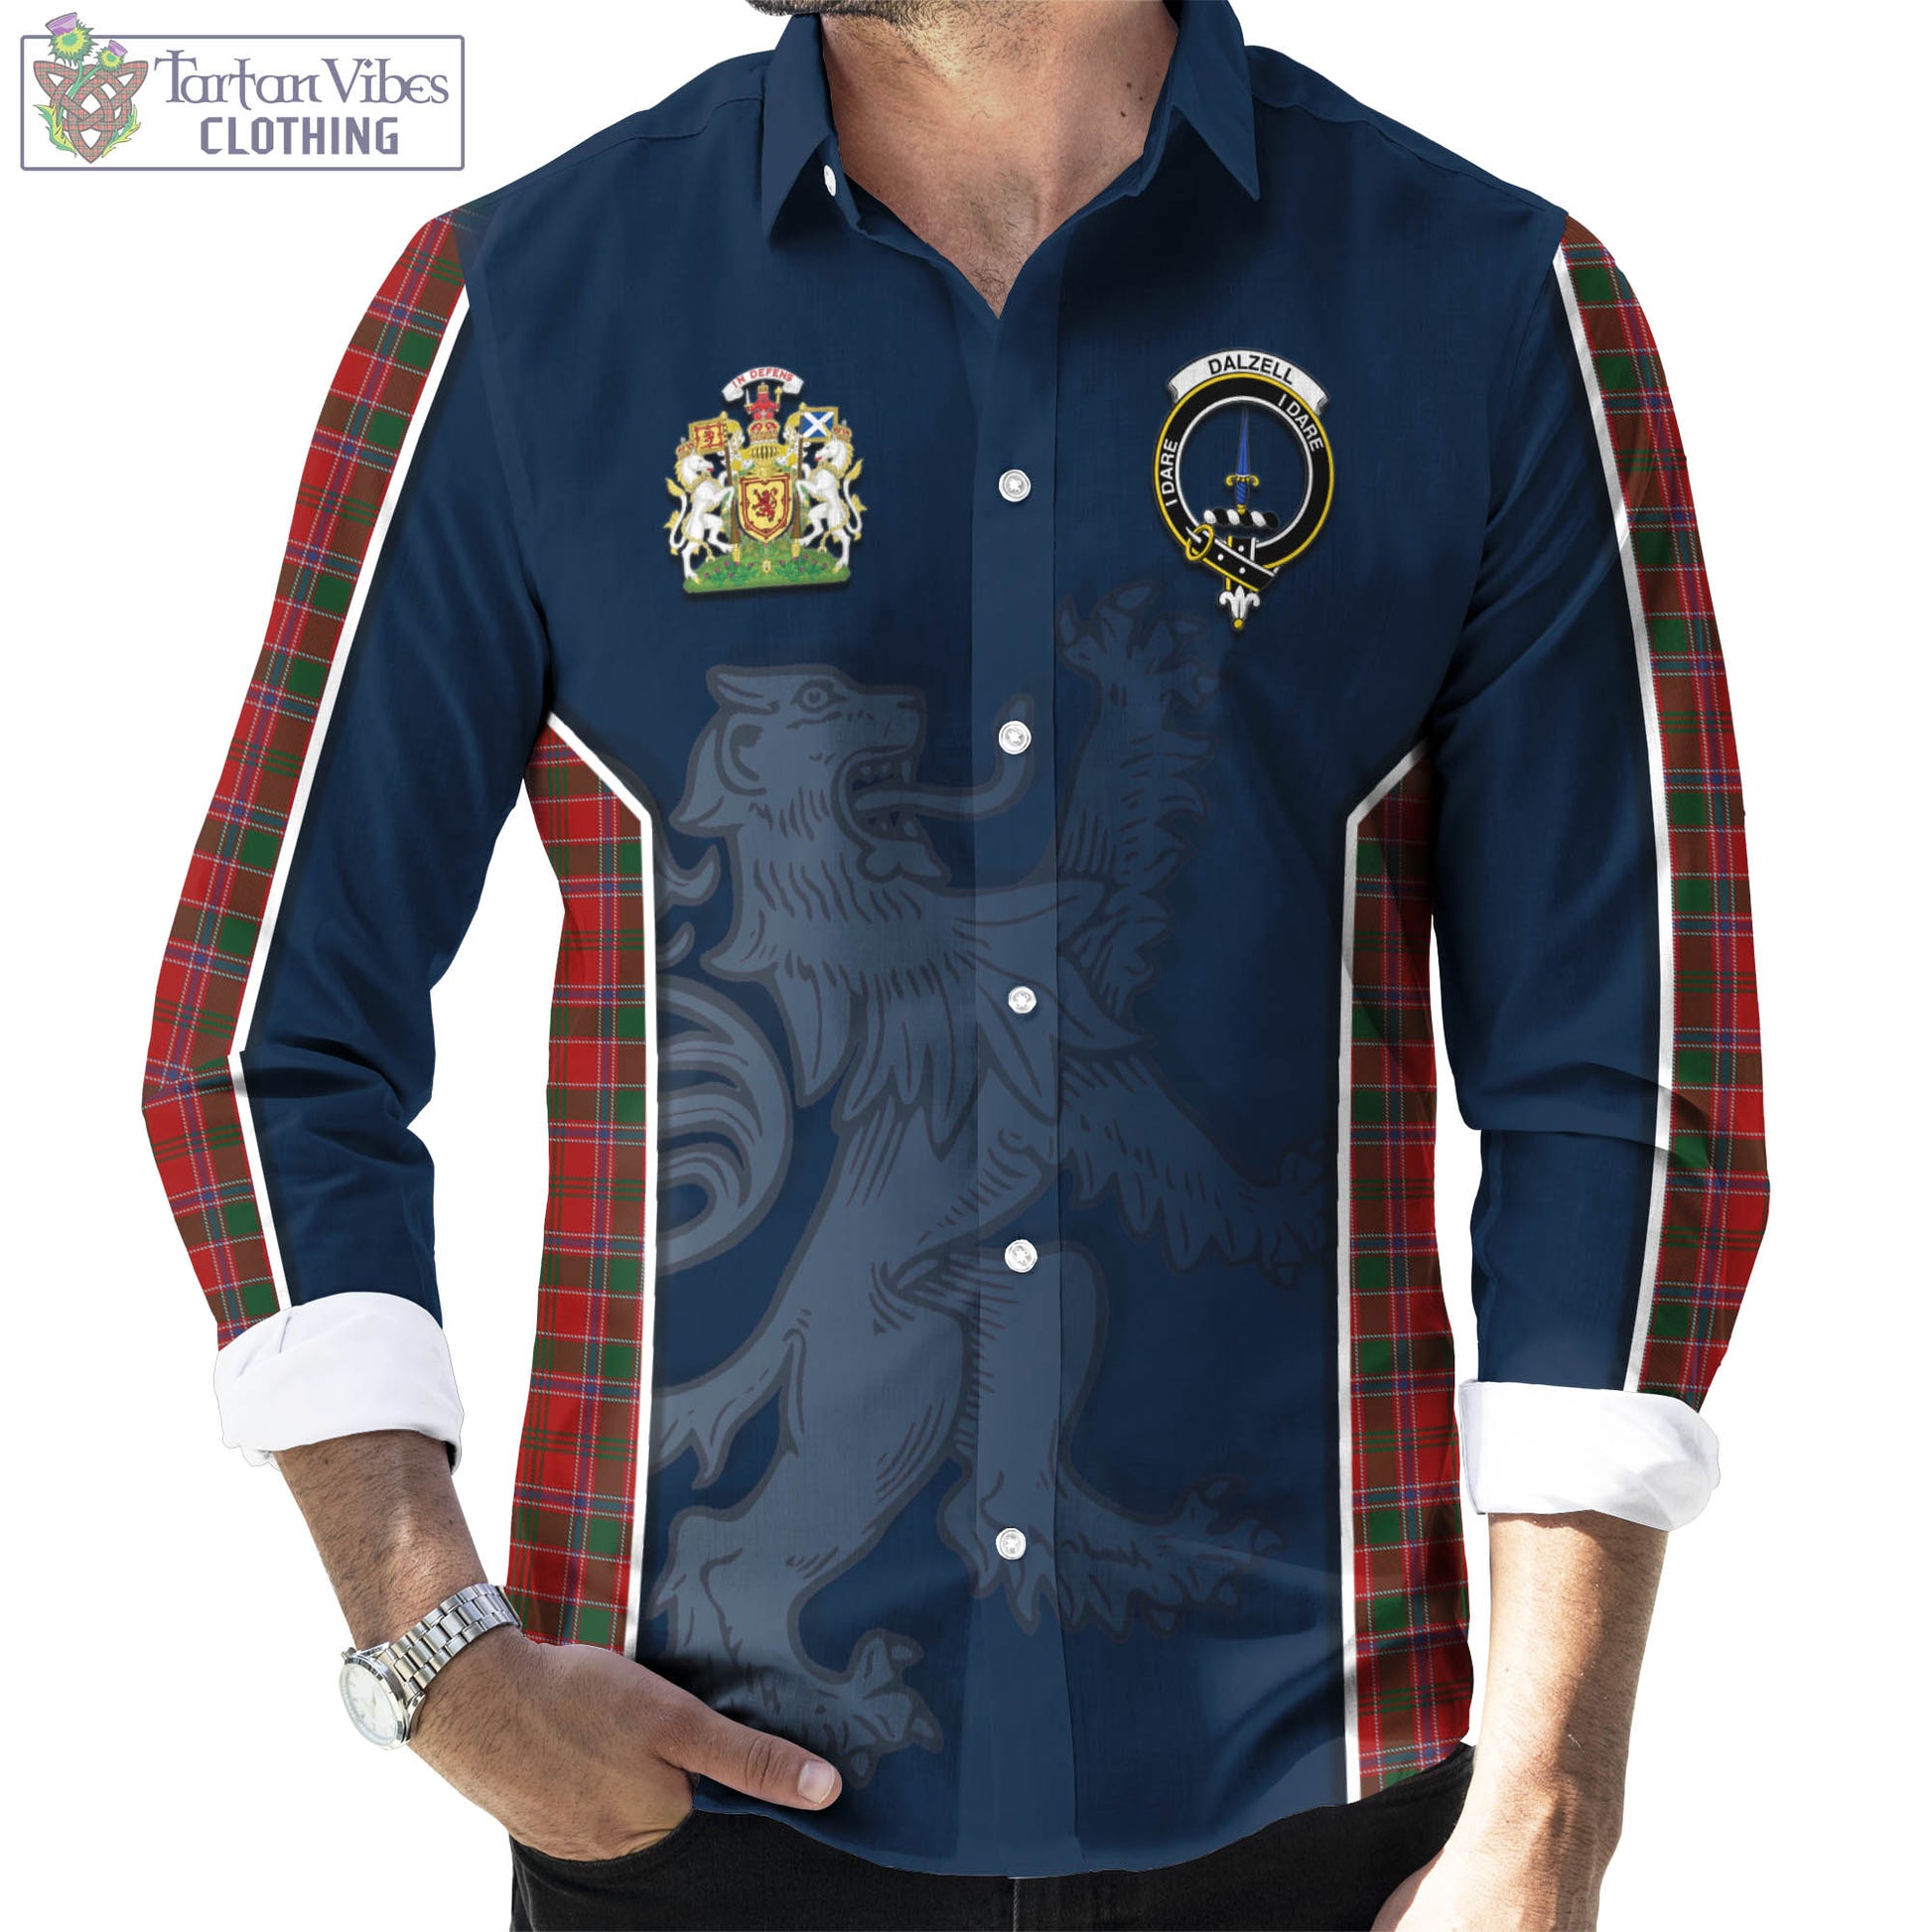 Tartan Vibes Clothing Dalzell (Dalziel) Tartan Long Sleeve Button Up Shirt with Family Crest and Lion Rampant Vibes Sport Style